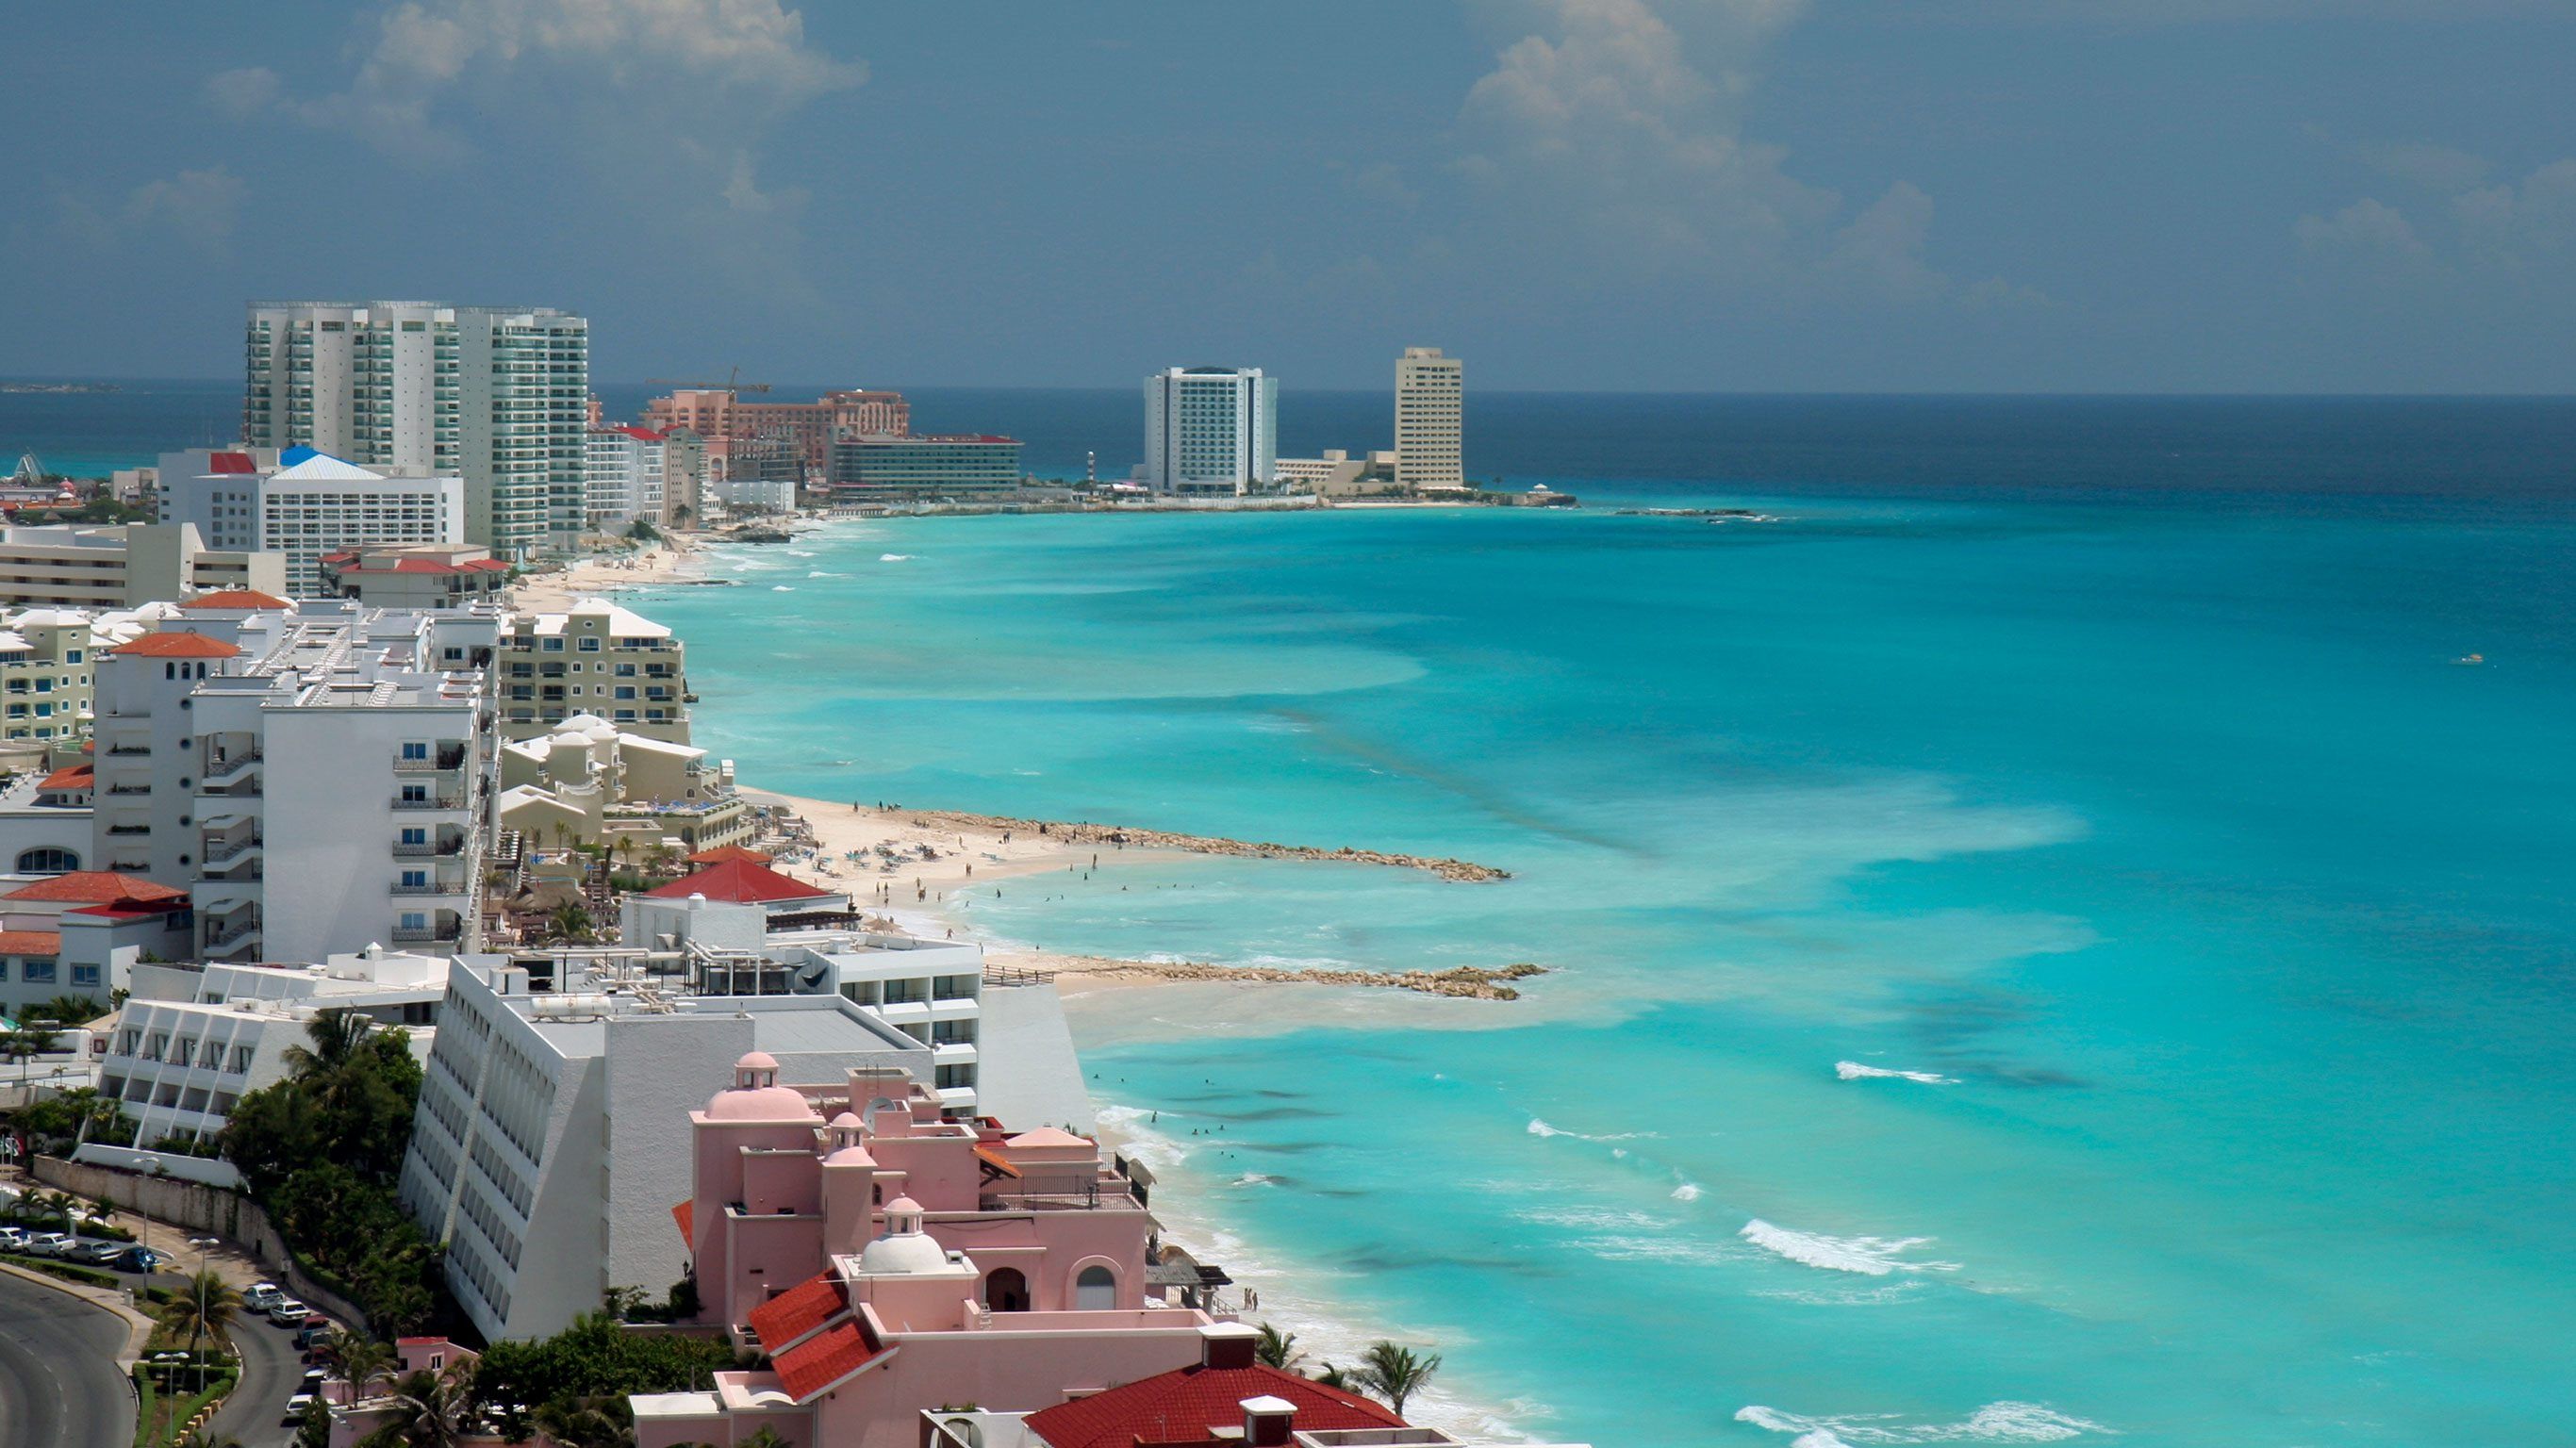 4K】Cancun,Mexico a blue sea destination in the Caribbean. Let me show you.  - YouTube